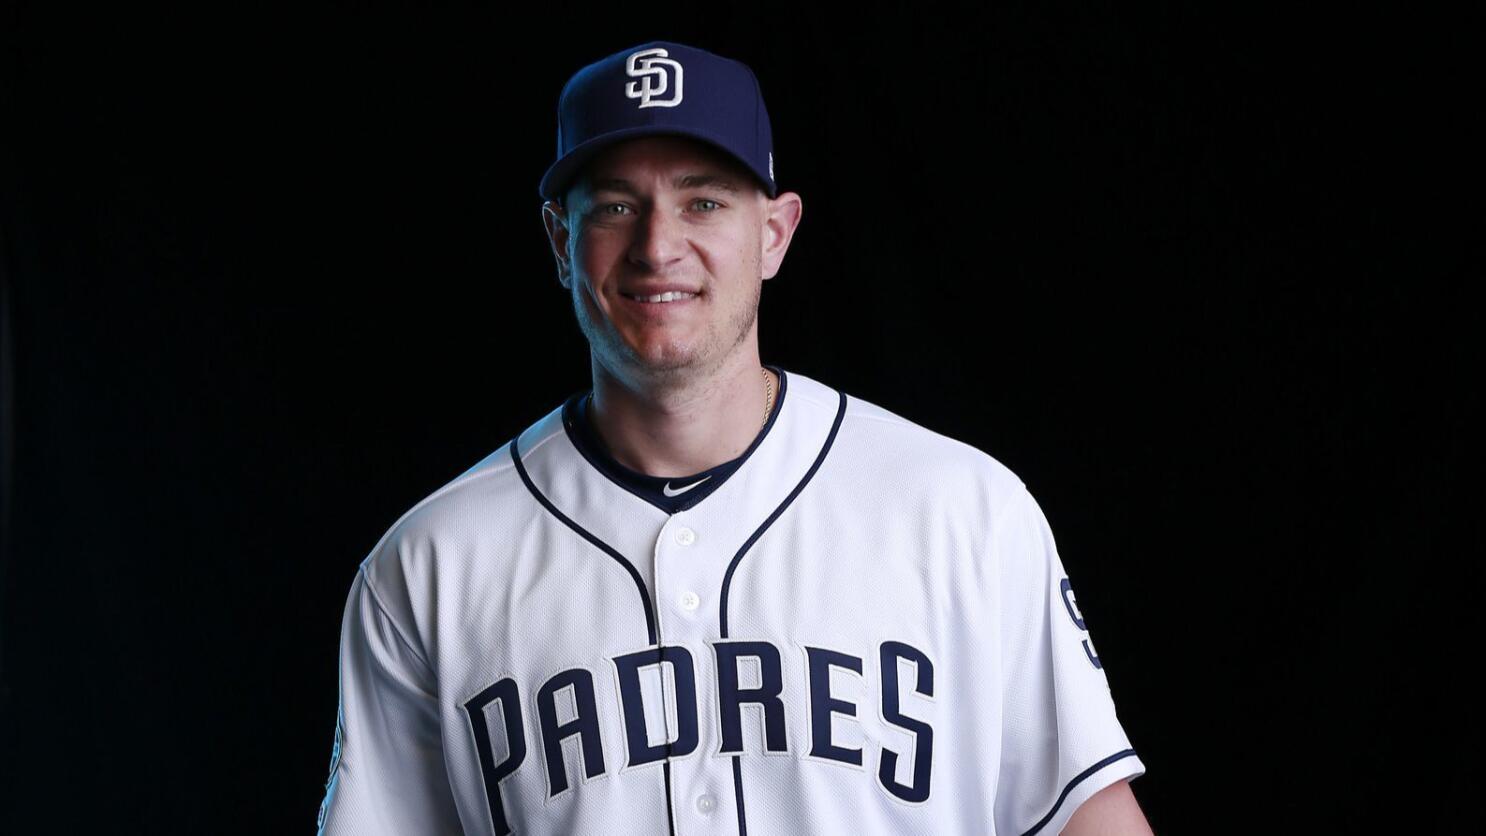 San Diego Padres: Players' Weekend Nicknames and Gear